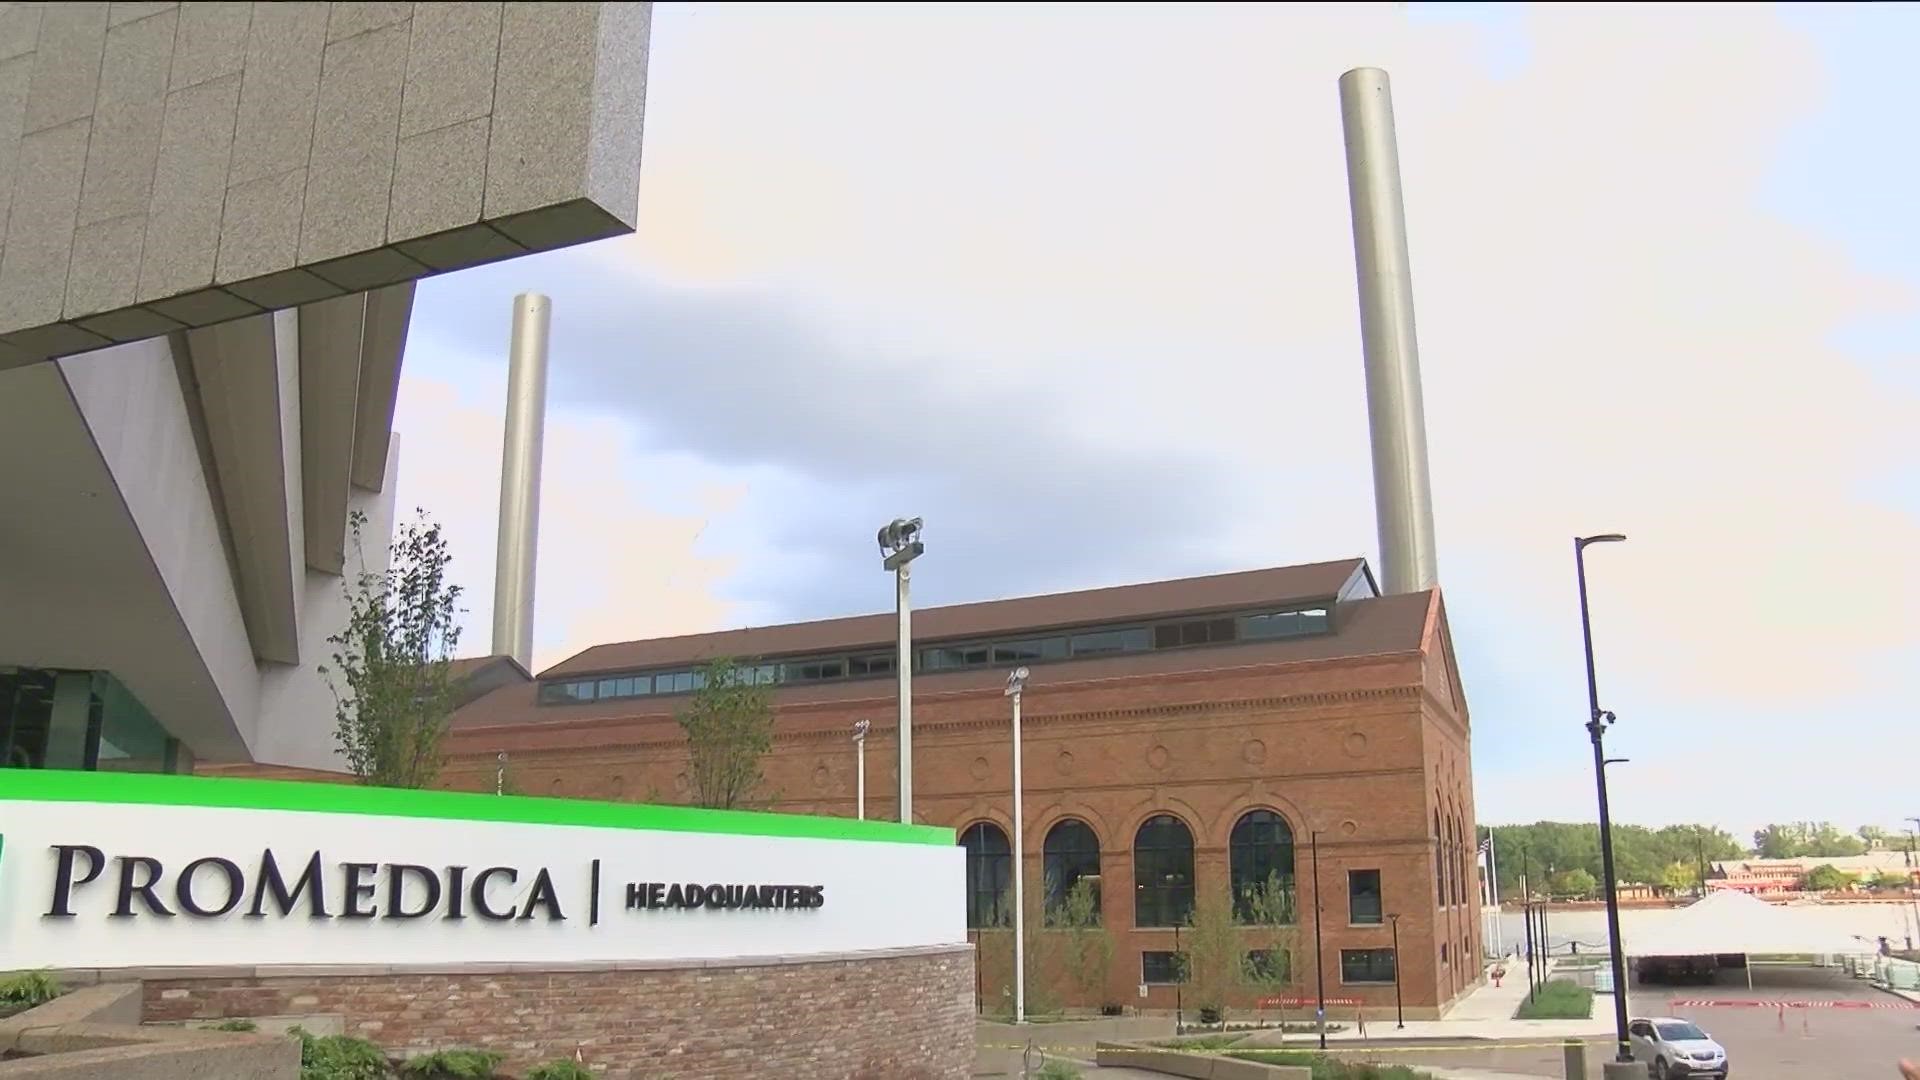 ProMedica's president and CEO said the move will 'simplify' the company's organizational structure and ensure 'long-term financial strength.'